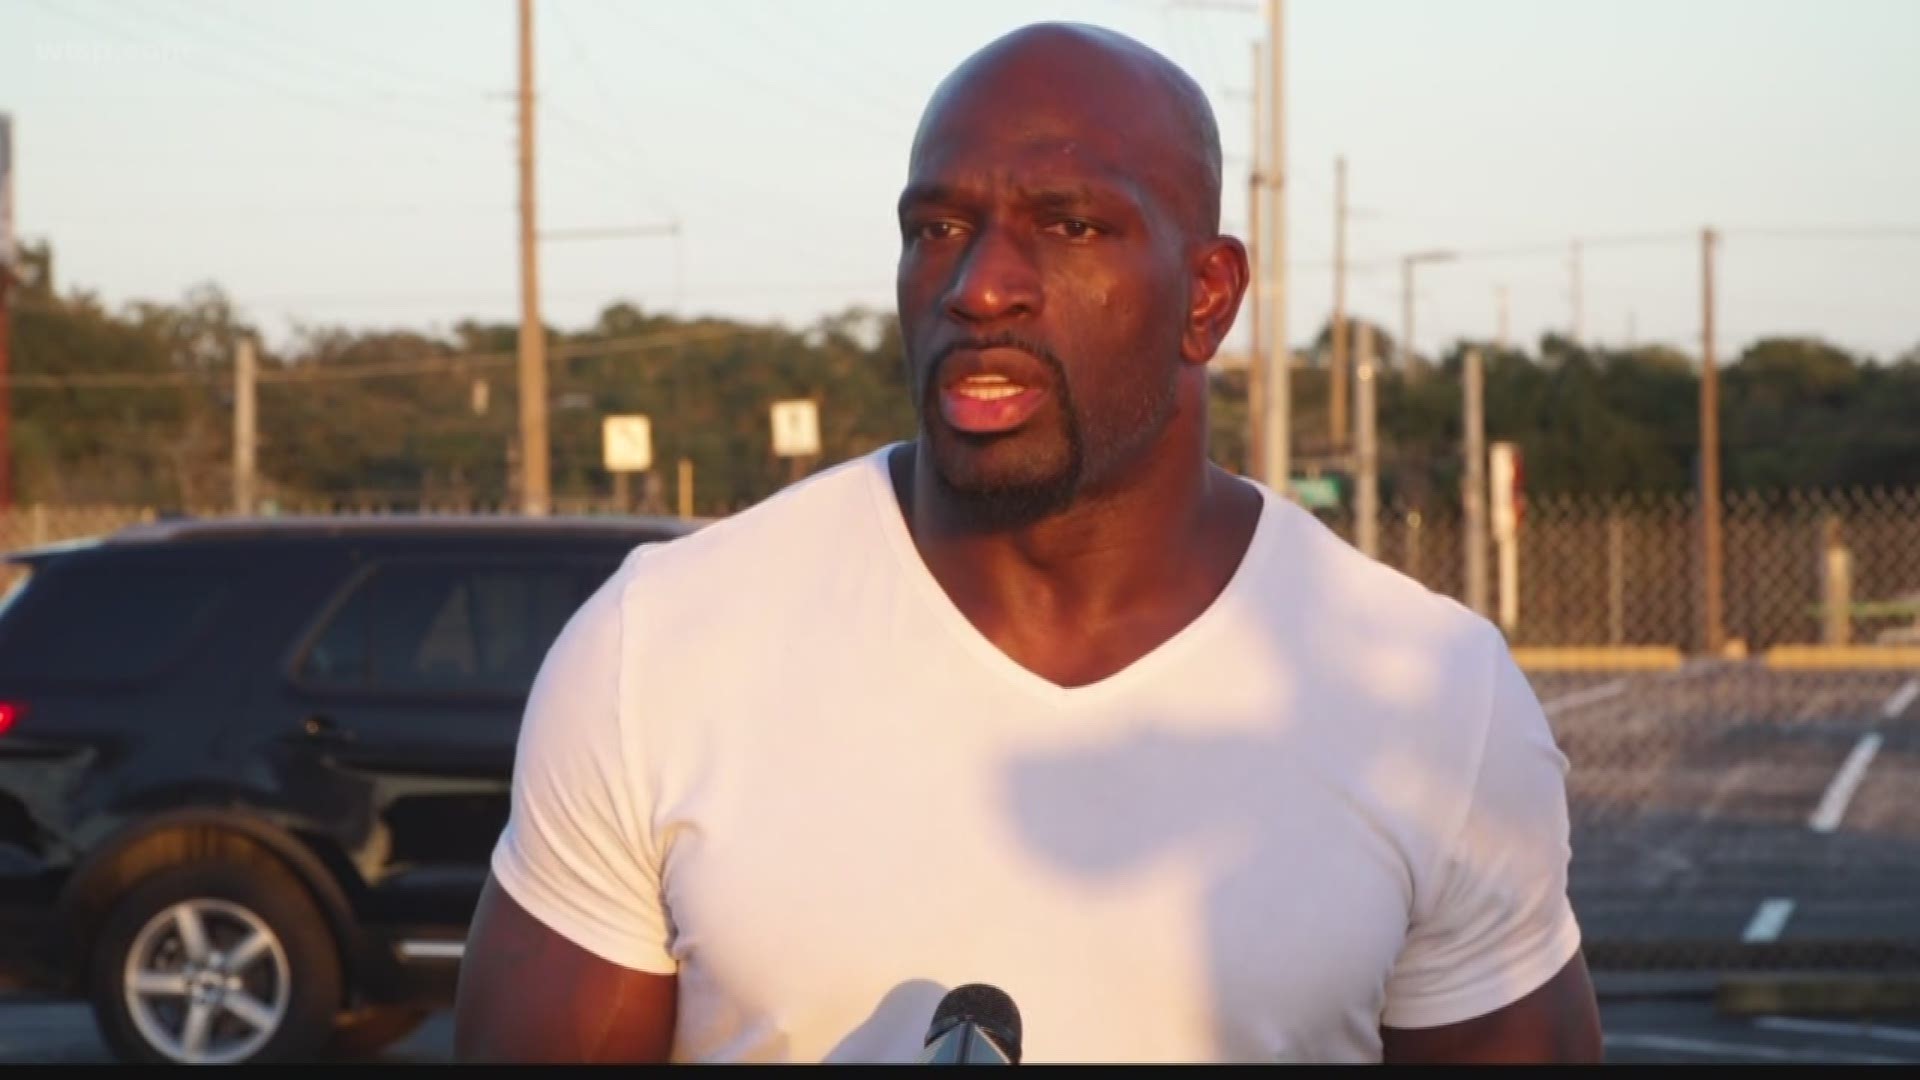 WWE Star Titus O'neil was good friends with Rene Williams, who was allegedly killed by her ex-boyfriend.